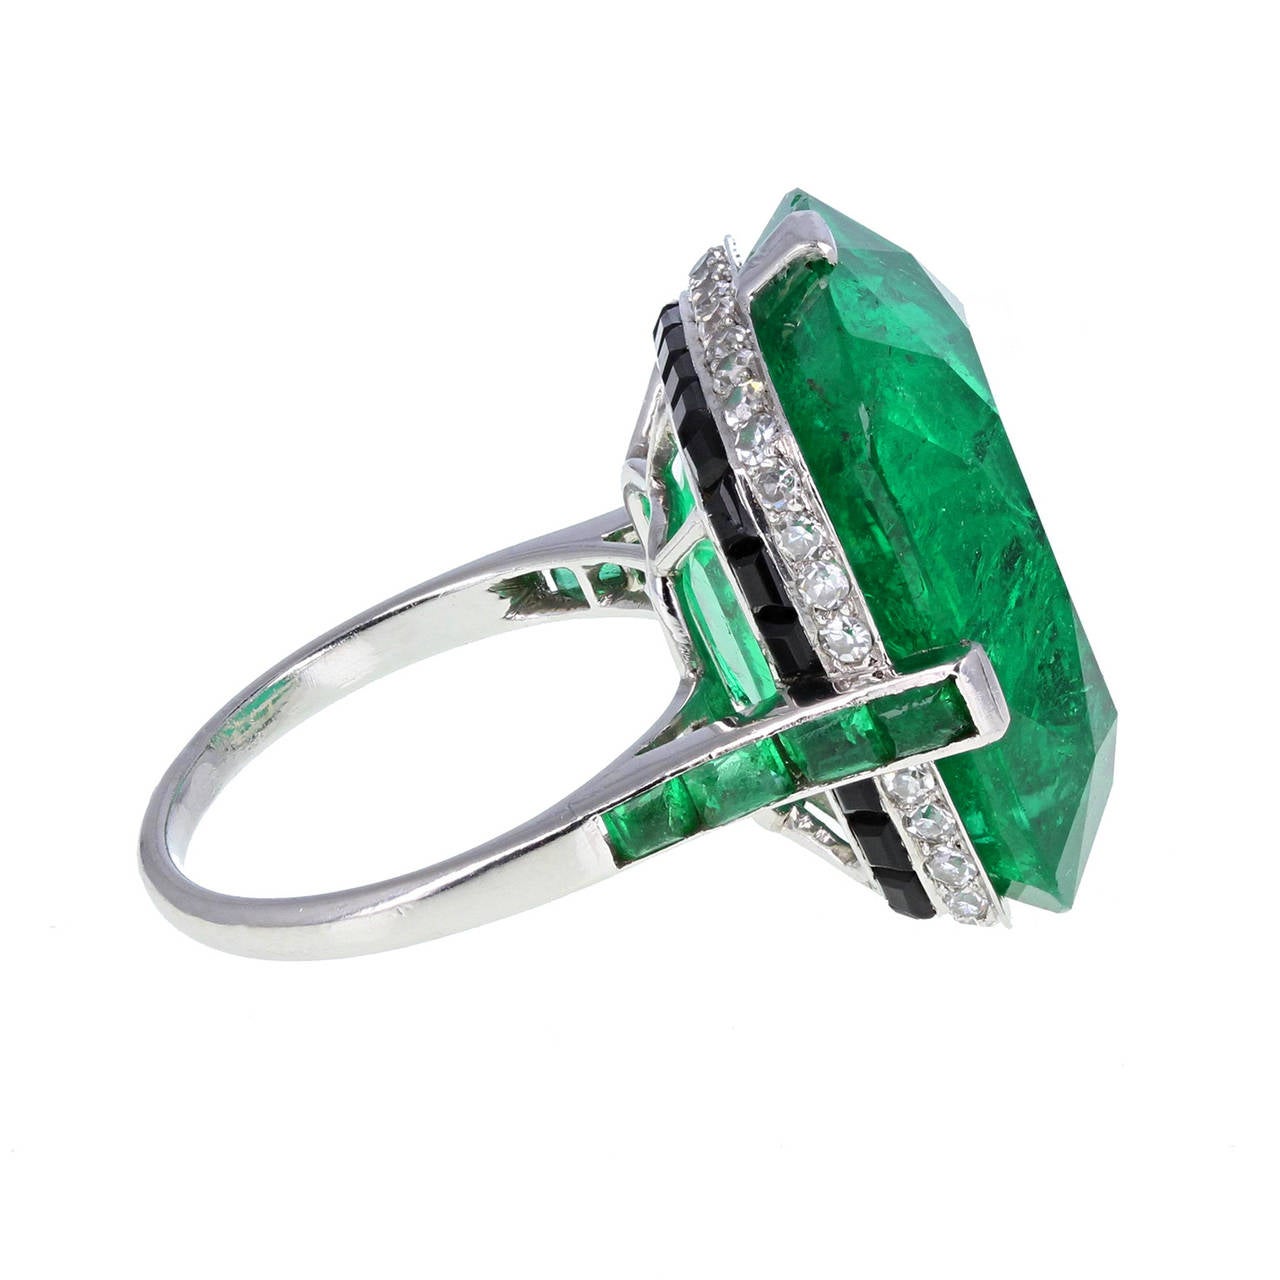 Cartier Important Art Deco Colombian Emerald Onyx Platinum Cocktail Ring In Excellent Condition For Sale In Newcastle Upon Tyne, GB